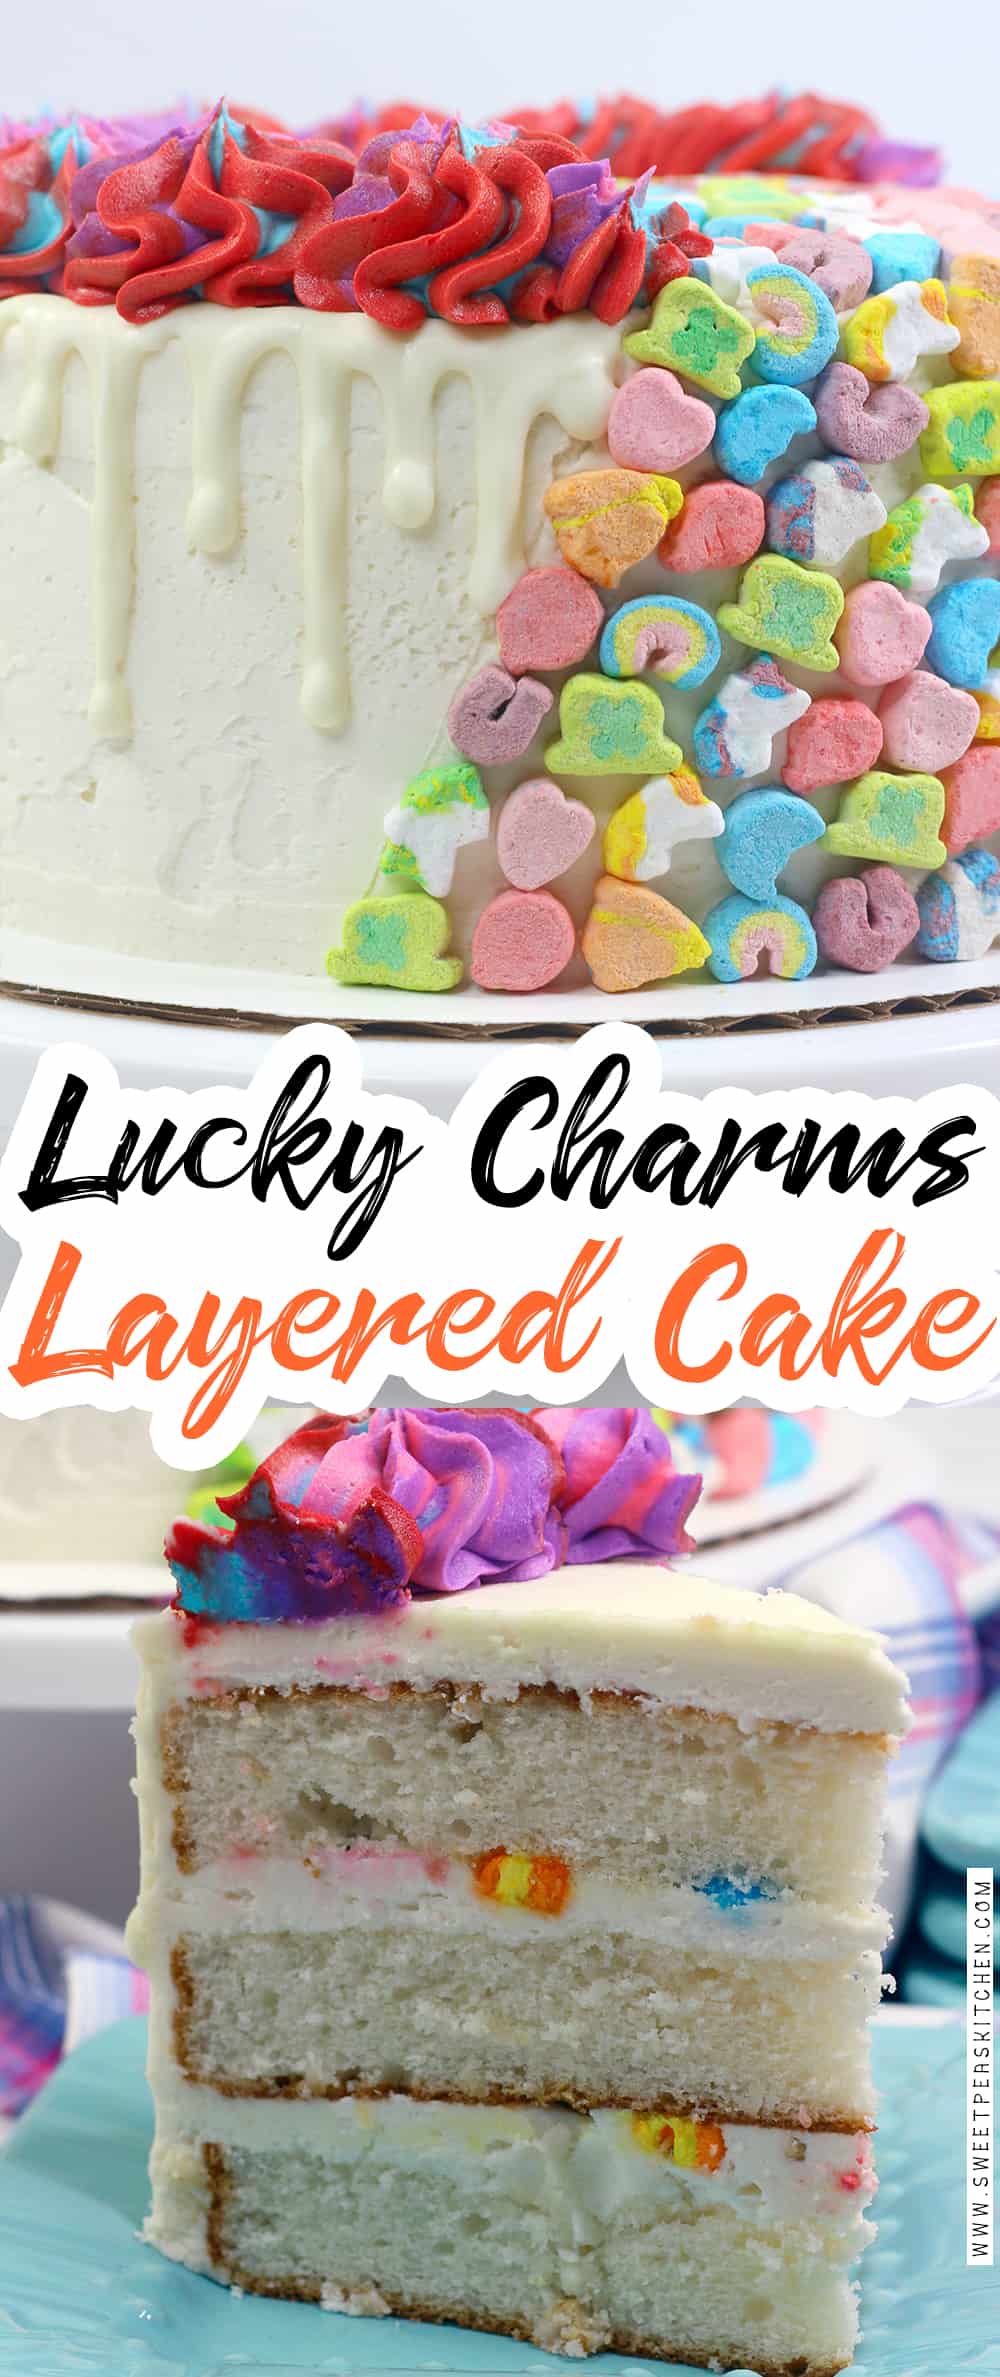 Lucky Charms Layered Cake